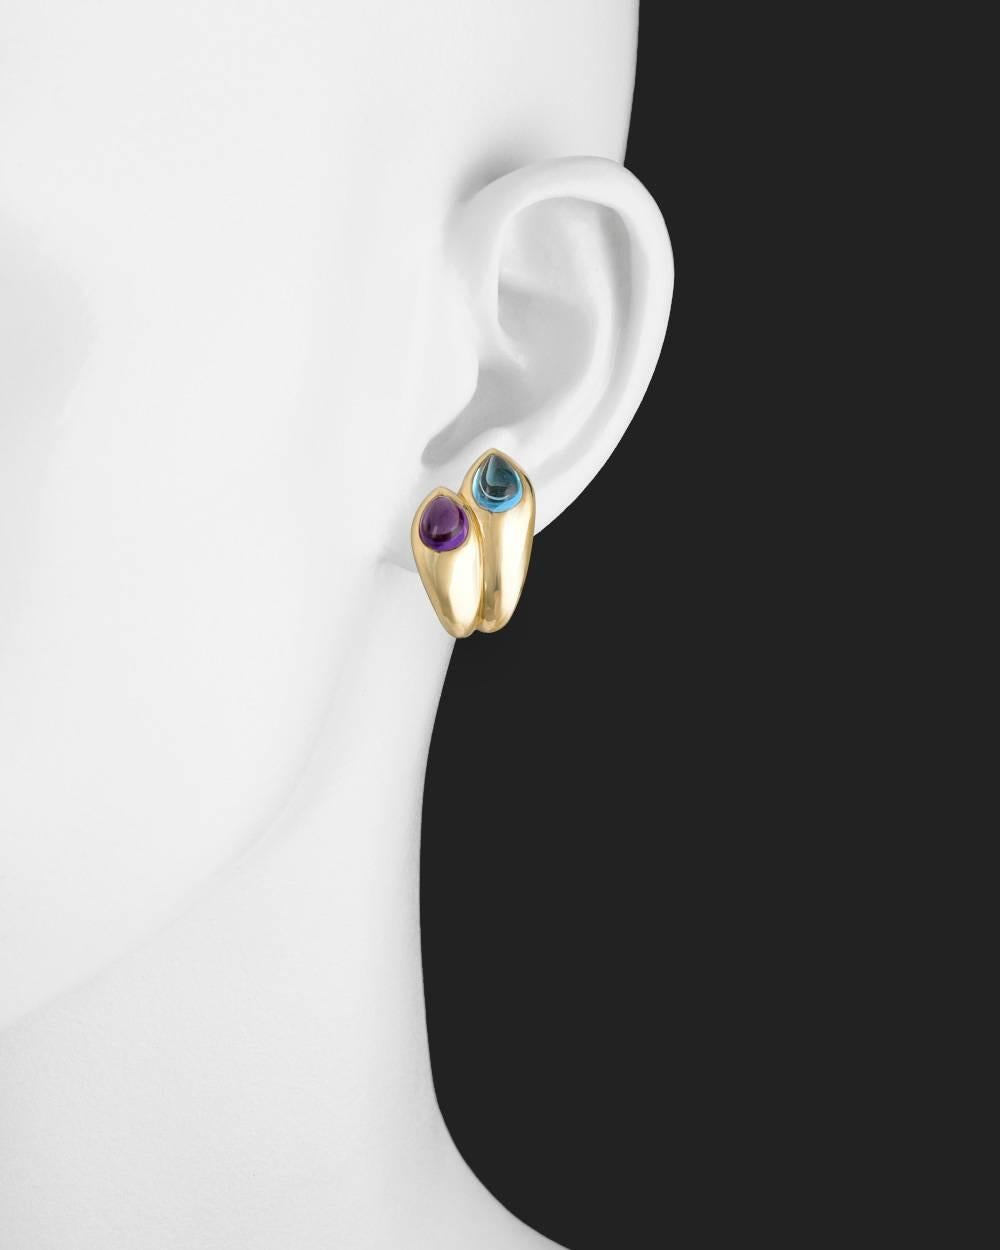 Gem-set earclips, showcasing twin pear-shaped cabochon blue topaz and amethyst, in polished 18k yellow gold, with clip backs, signed Bvlgari. Two amethysts weighing approximately 1.84 total carats and two blue topaz weighing approximately 2.44 total